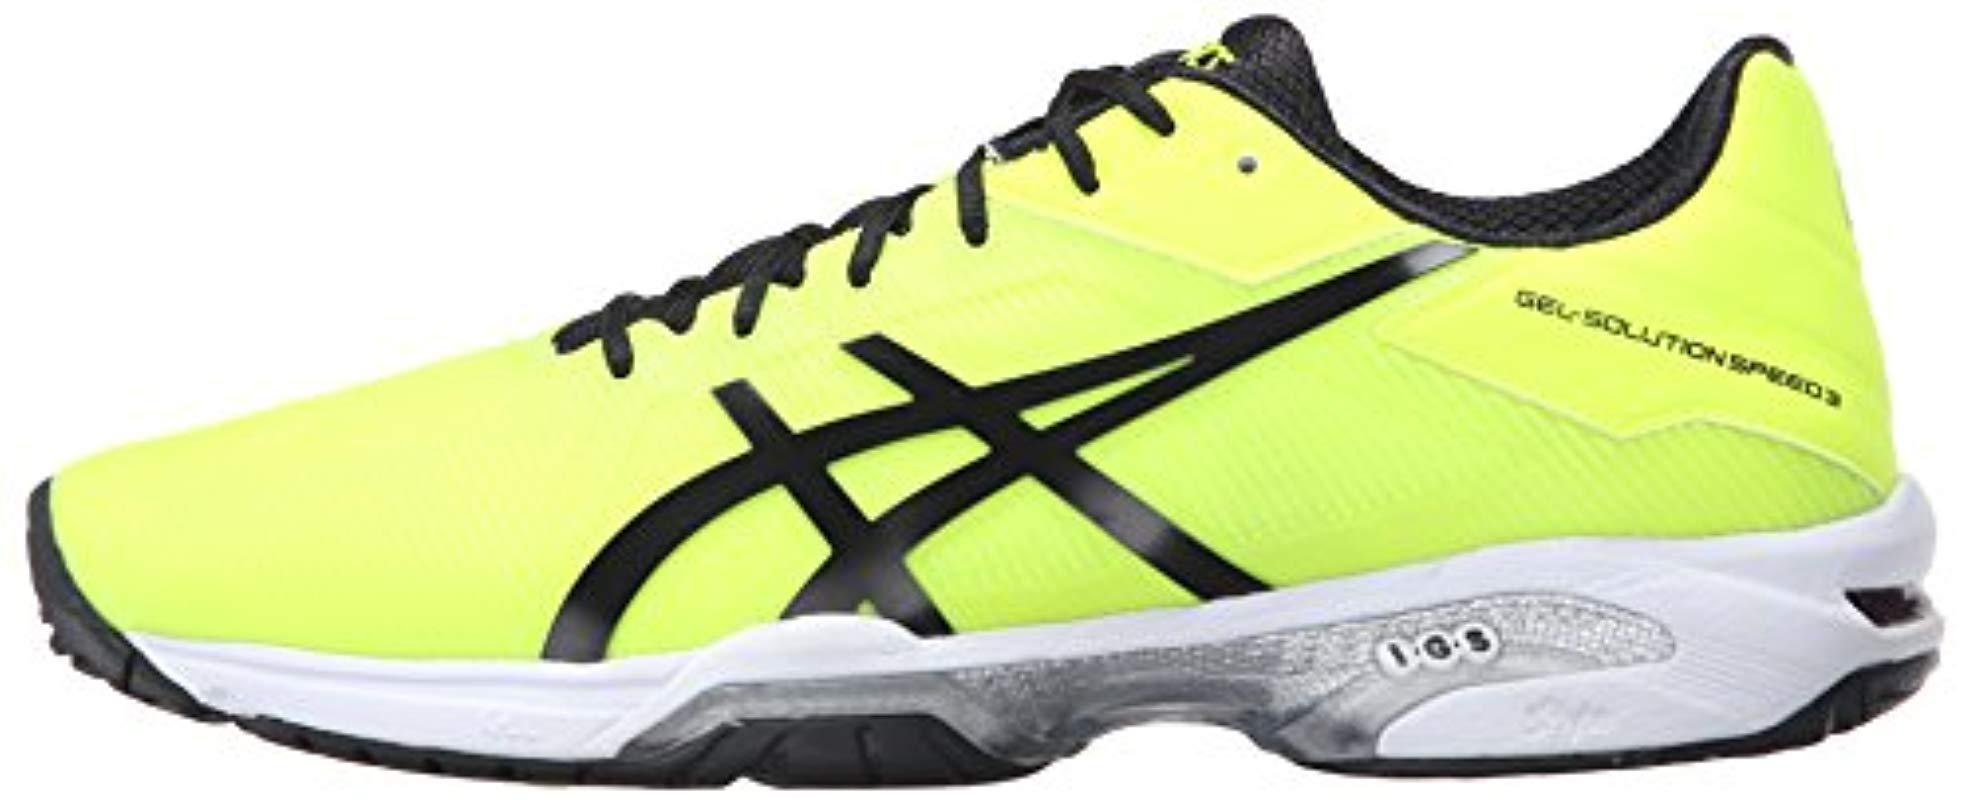 Lyst - Asics Gel-solution Speed 3 Tennis Shoes in Yellow for Men